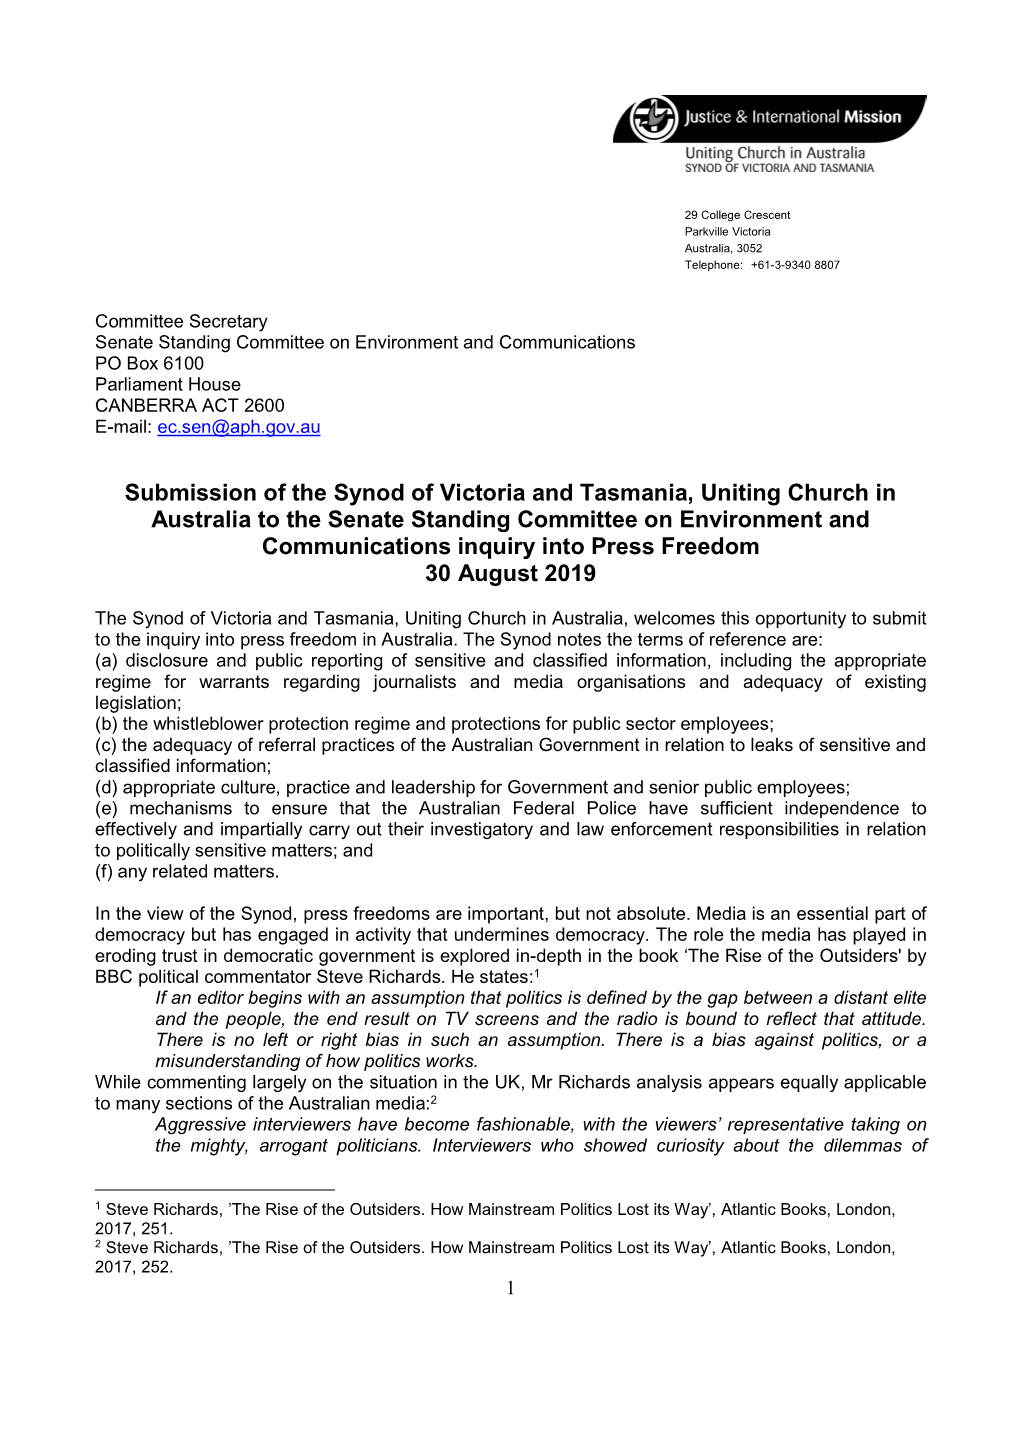 Submission of the Synod of Victoria and Tasmania, Uniting Church In